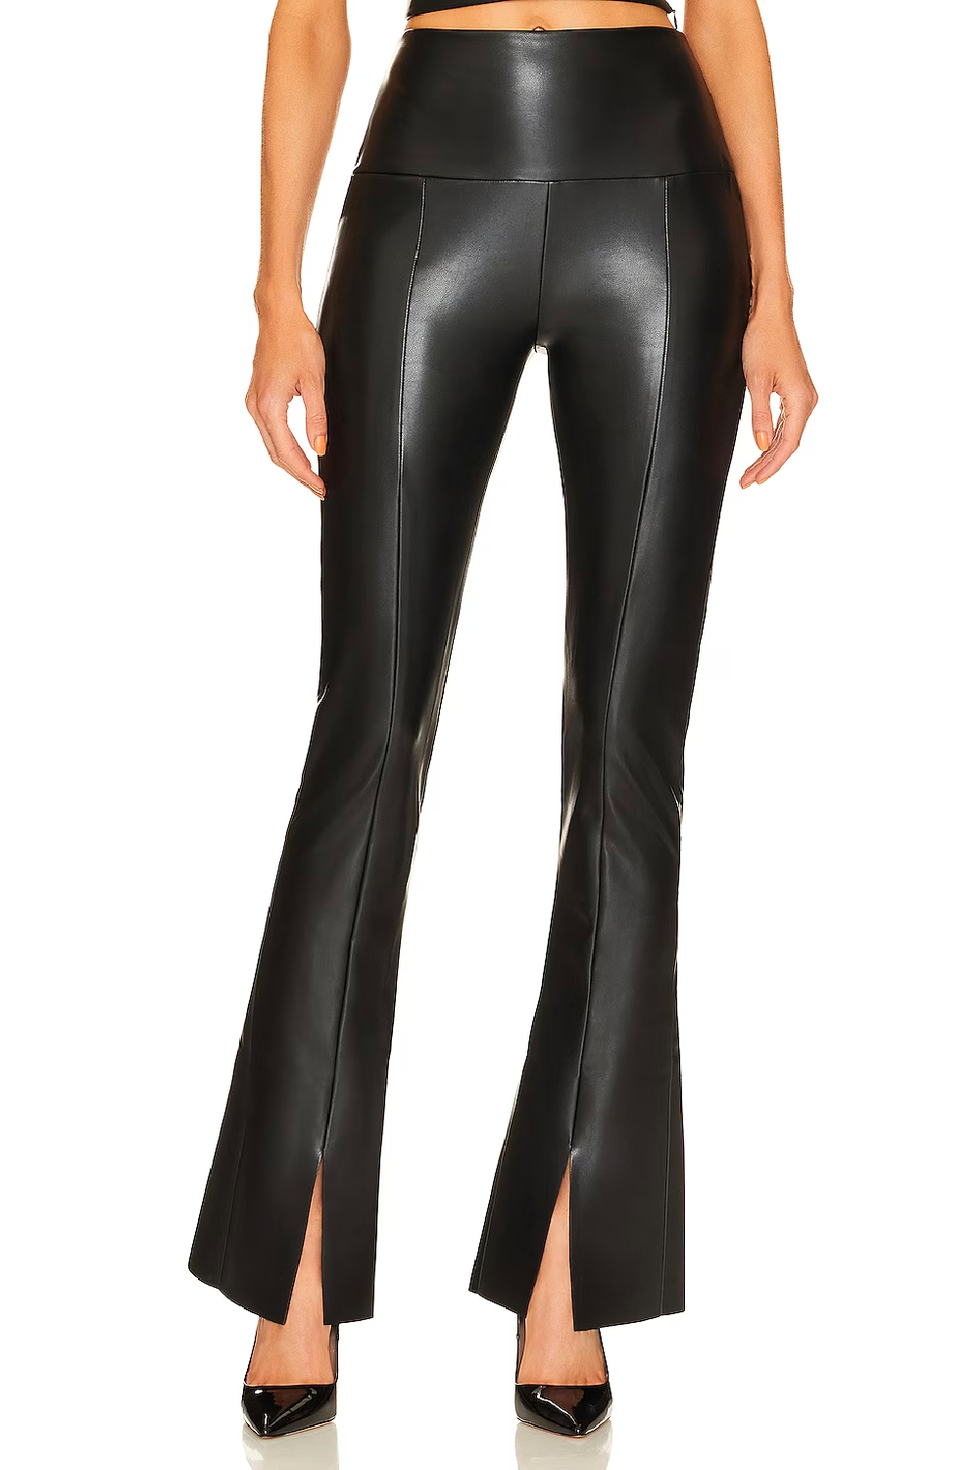 These 'Warm' Faux-Leather Leggings Are 43% Off at  — Almost 10,000  5-Star Reviews